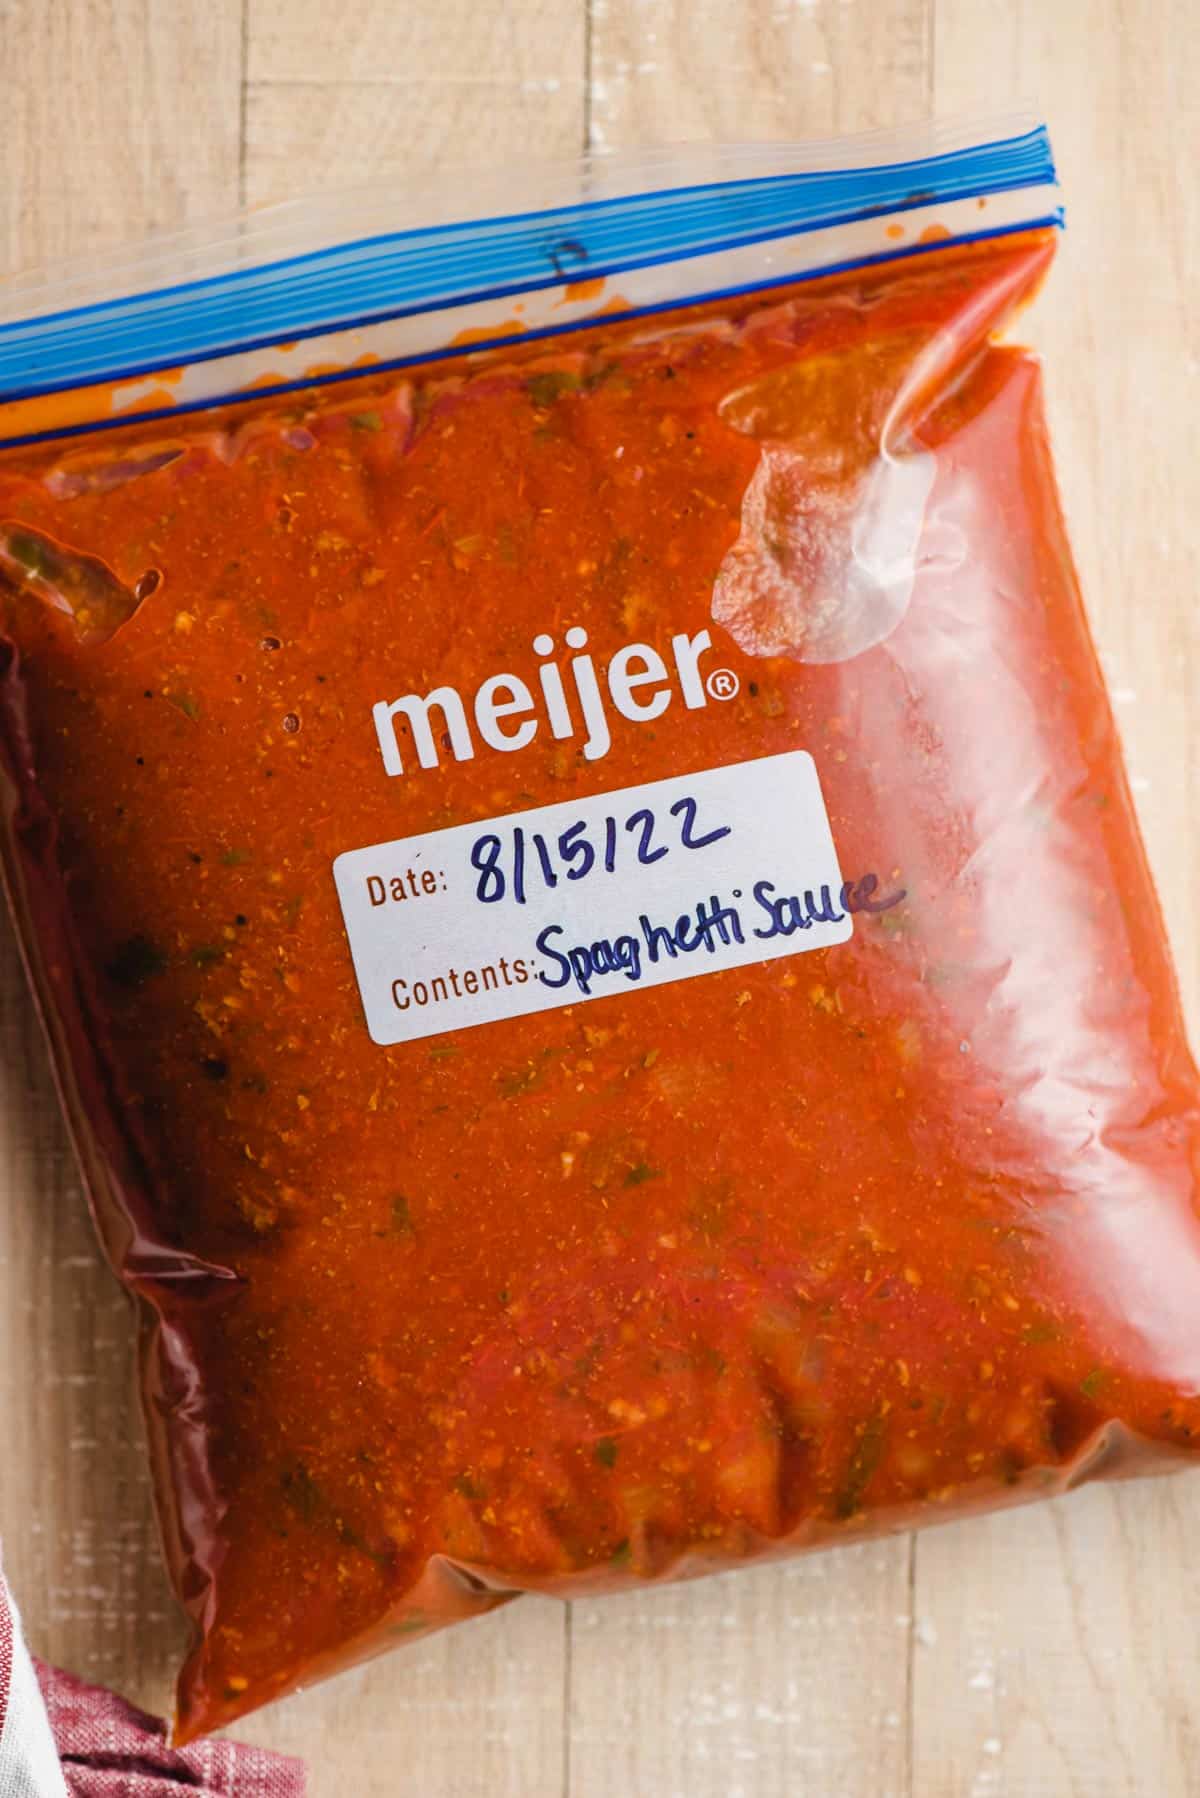 A ziplock bag filled with homemade spaghetti sauce.